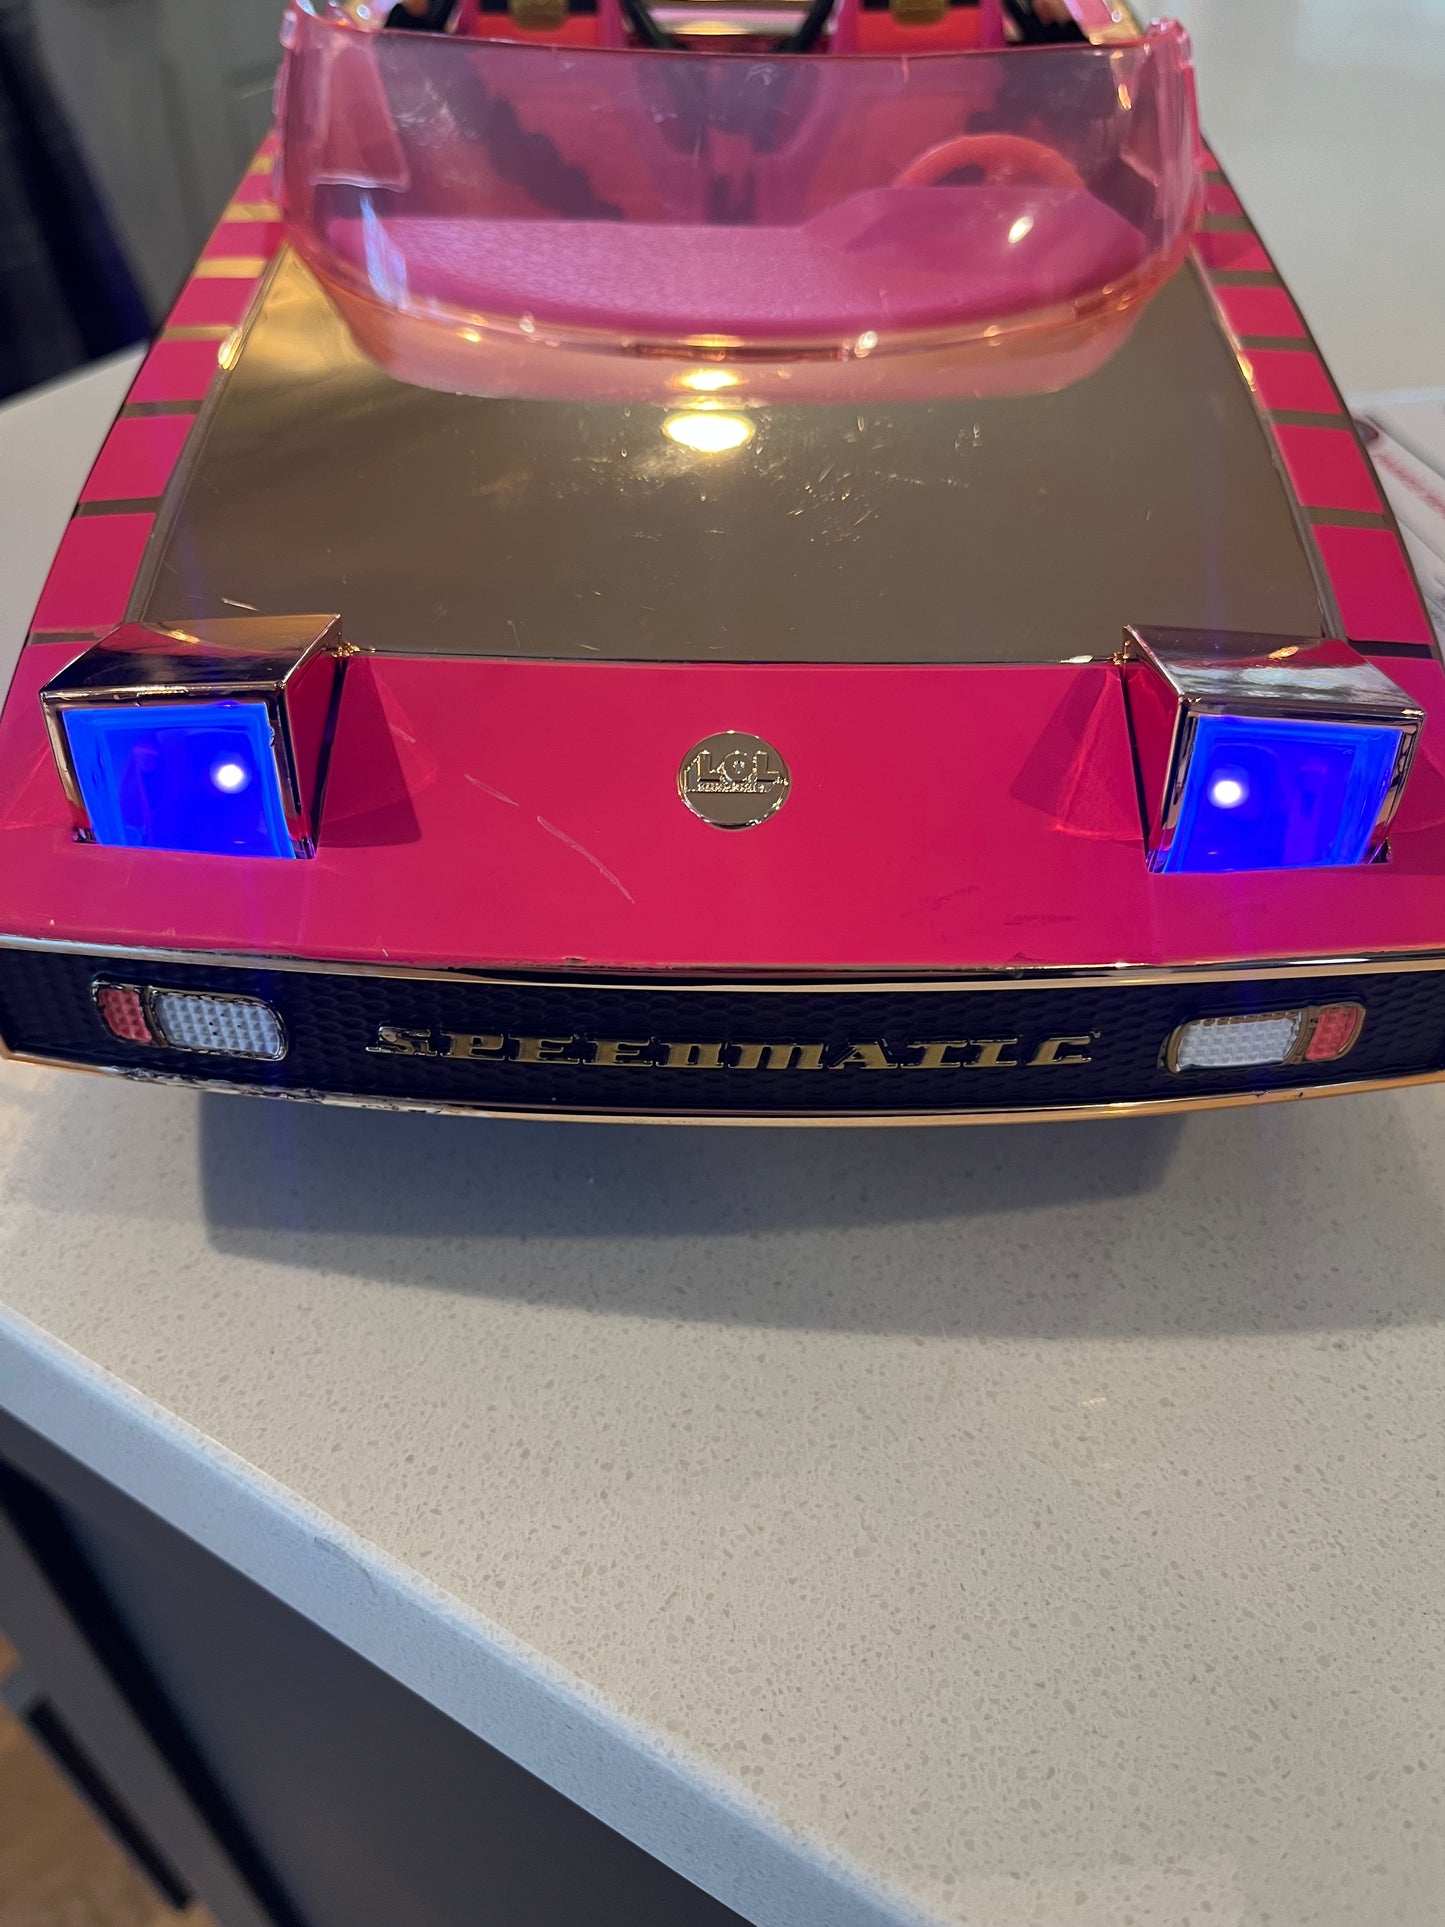 PPU  45241  LOL Pink and Gold Speedmatic Convertible Car with Pool and Disco Dance Floor and Lights